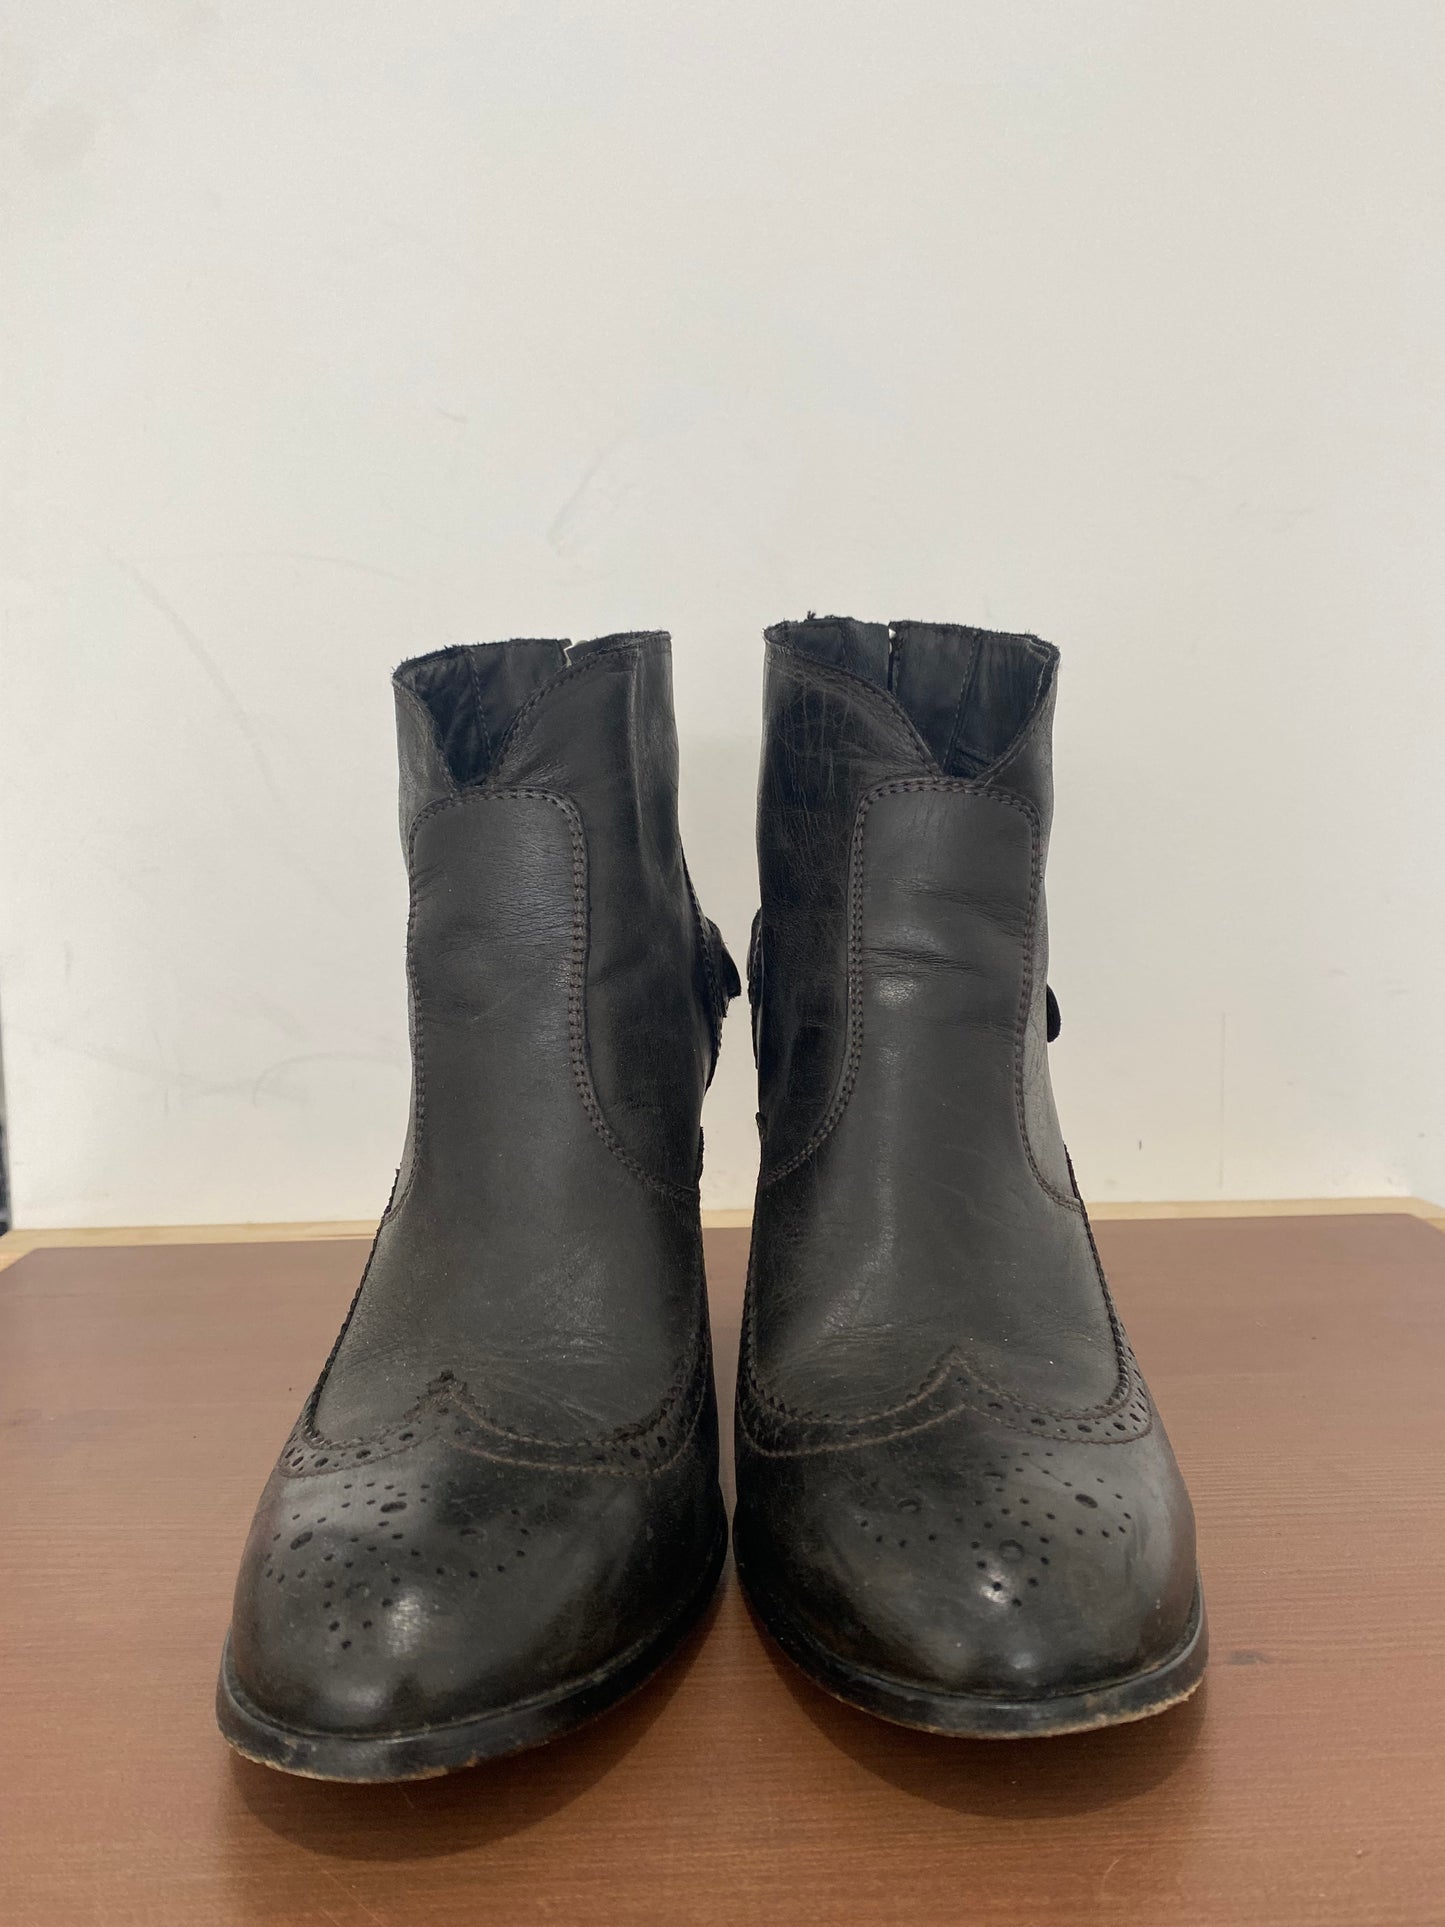 Belstaff Brown Leather Ankle Boots Size 7